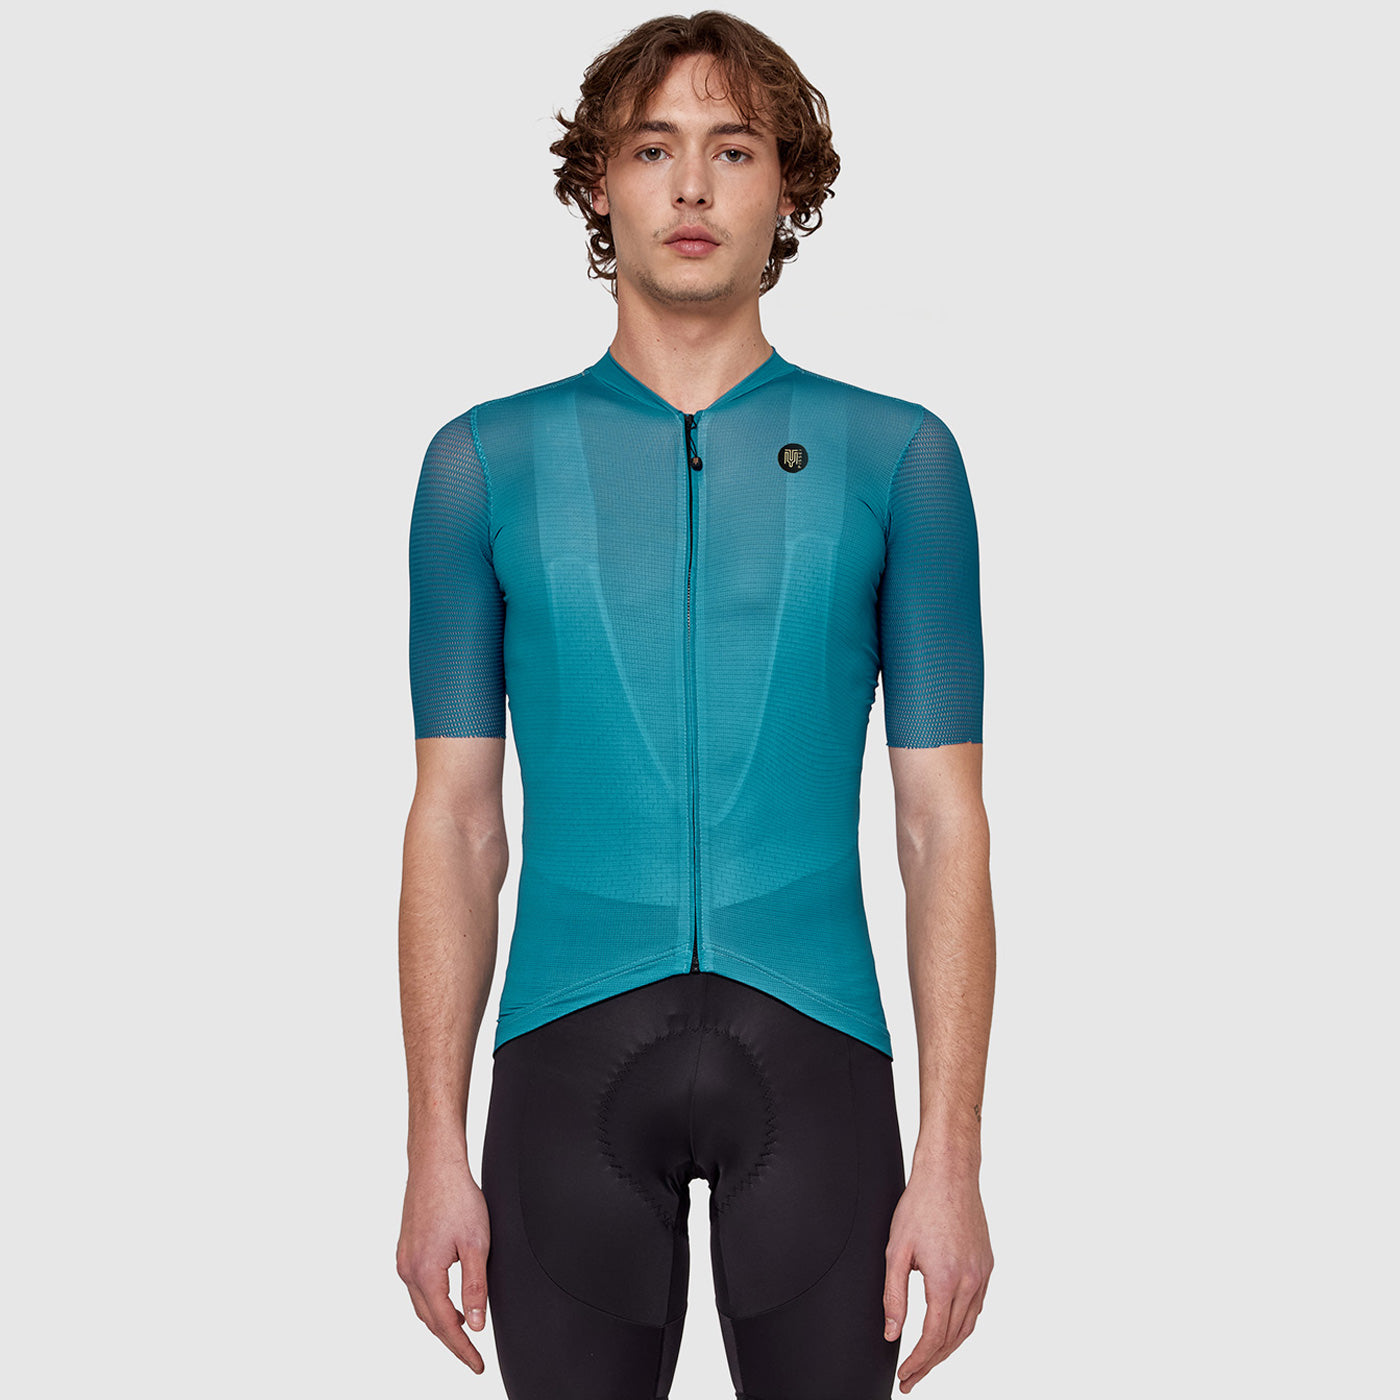 Pissei Magistral jersey CLT - Blue | All4cycling